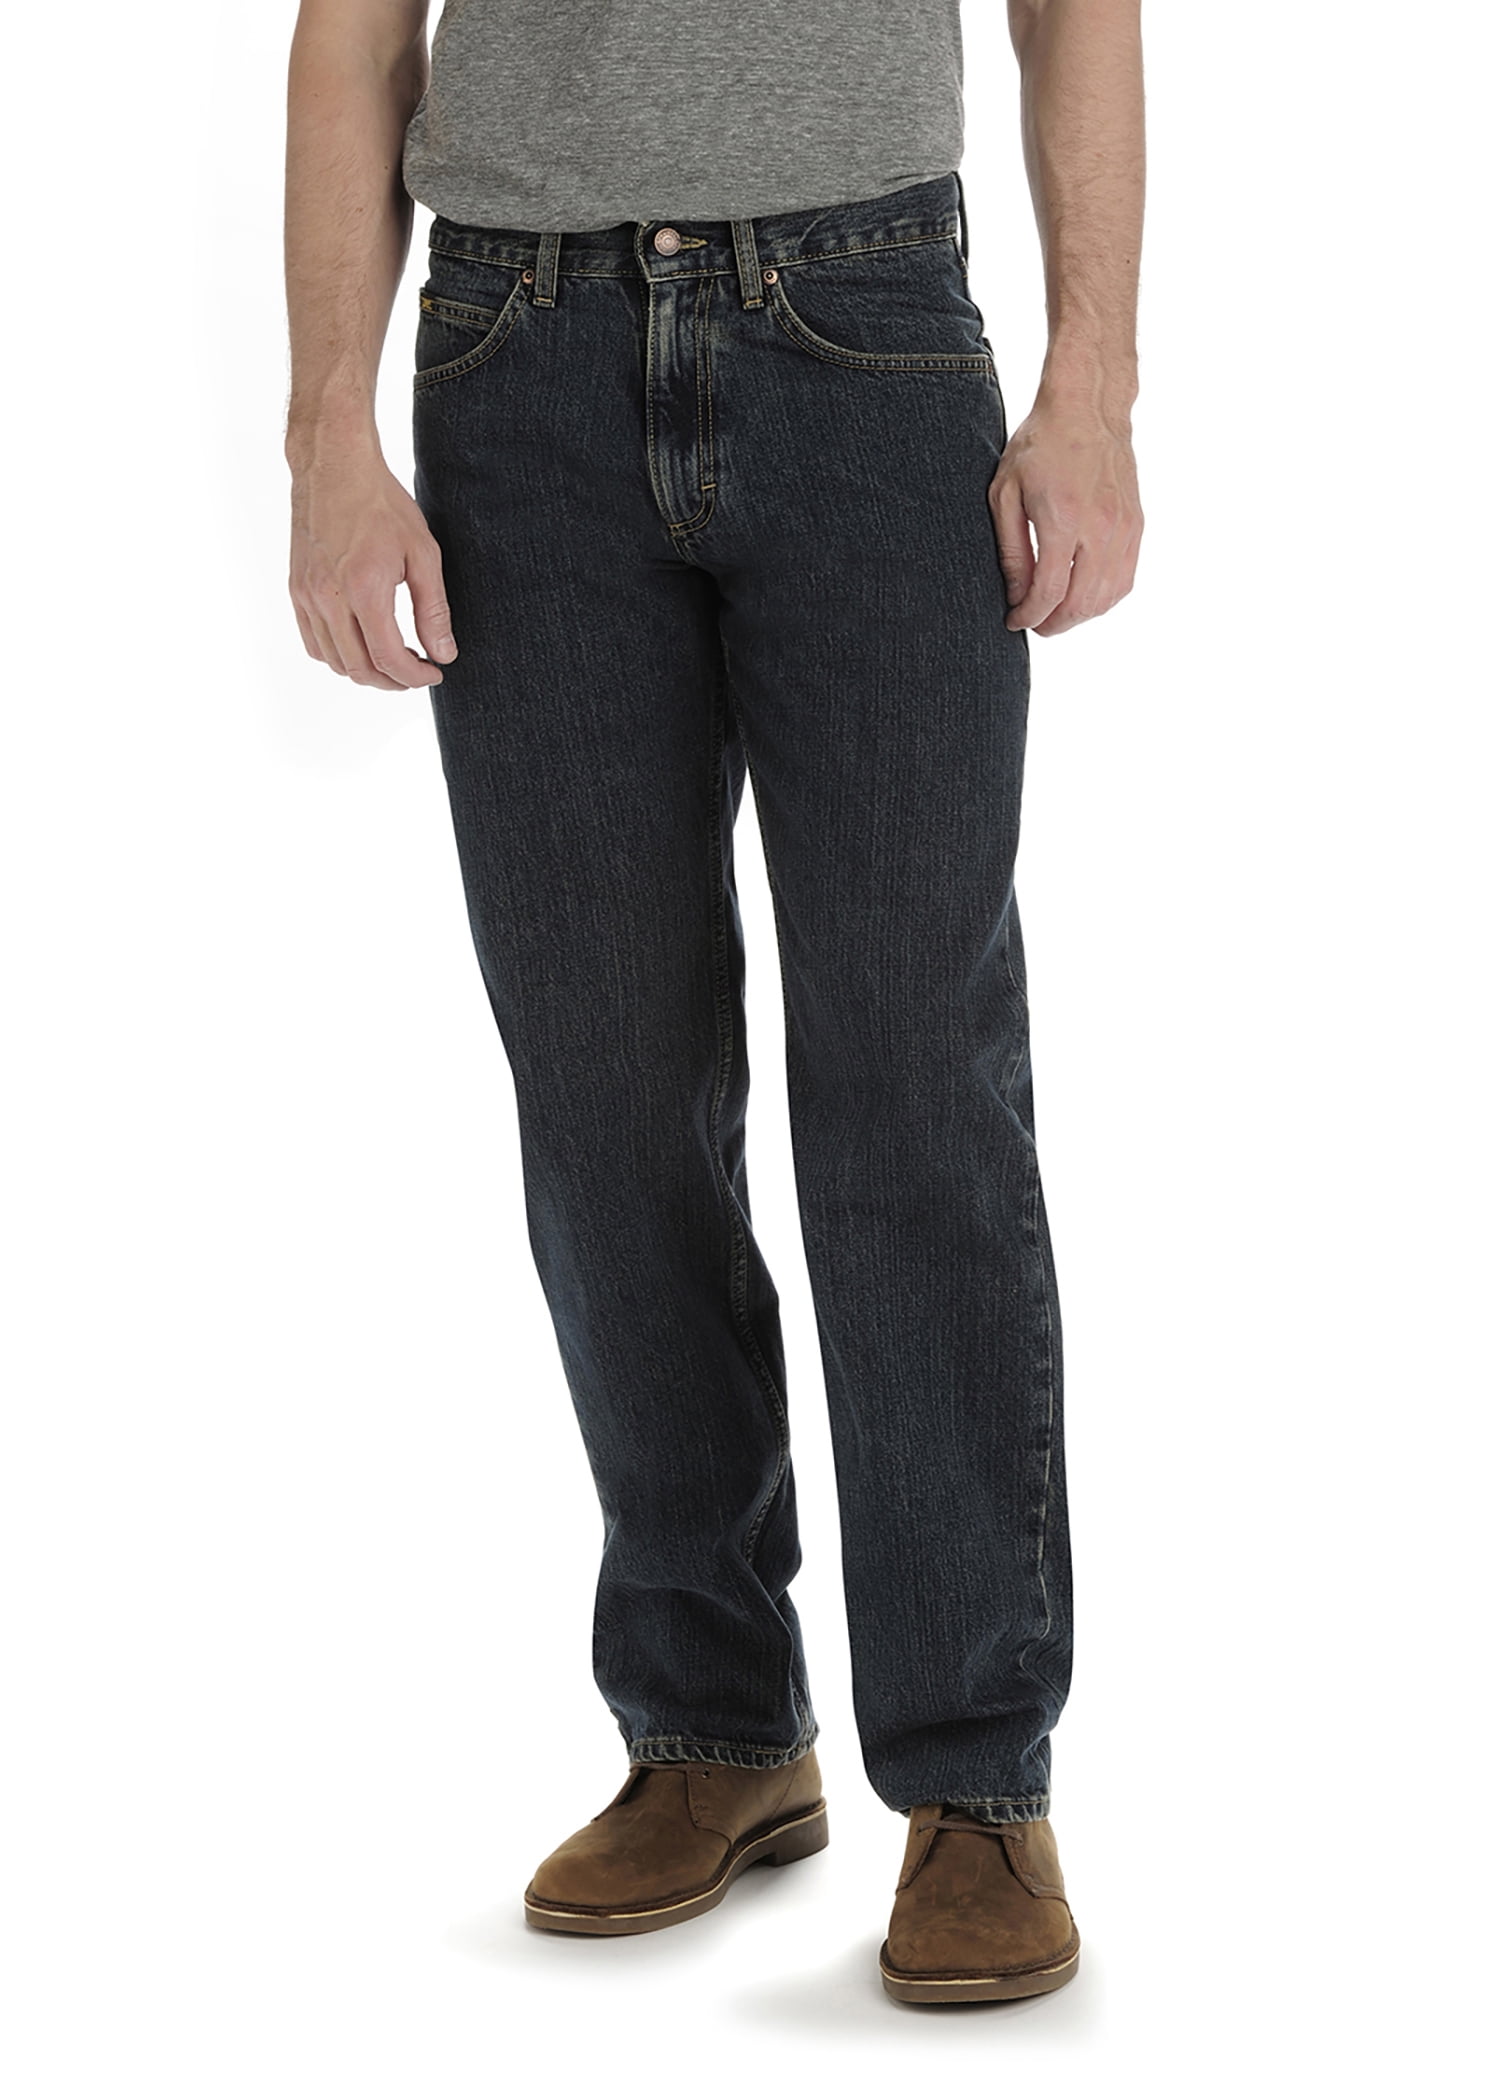 lee men's relaxed fit stretch jeans